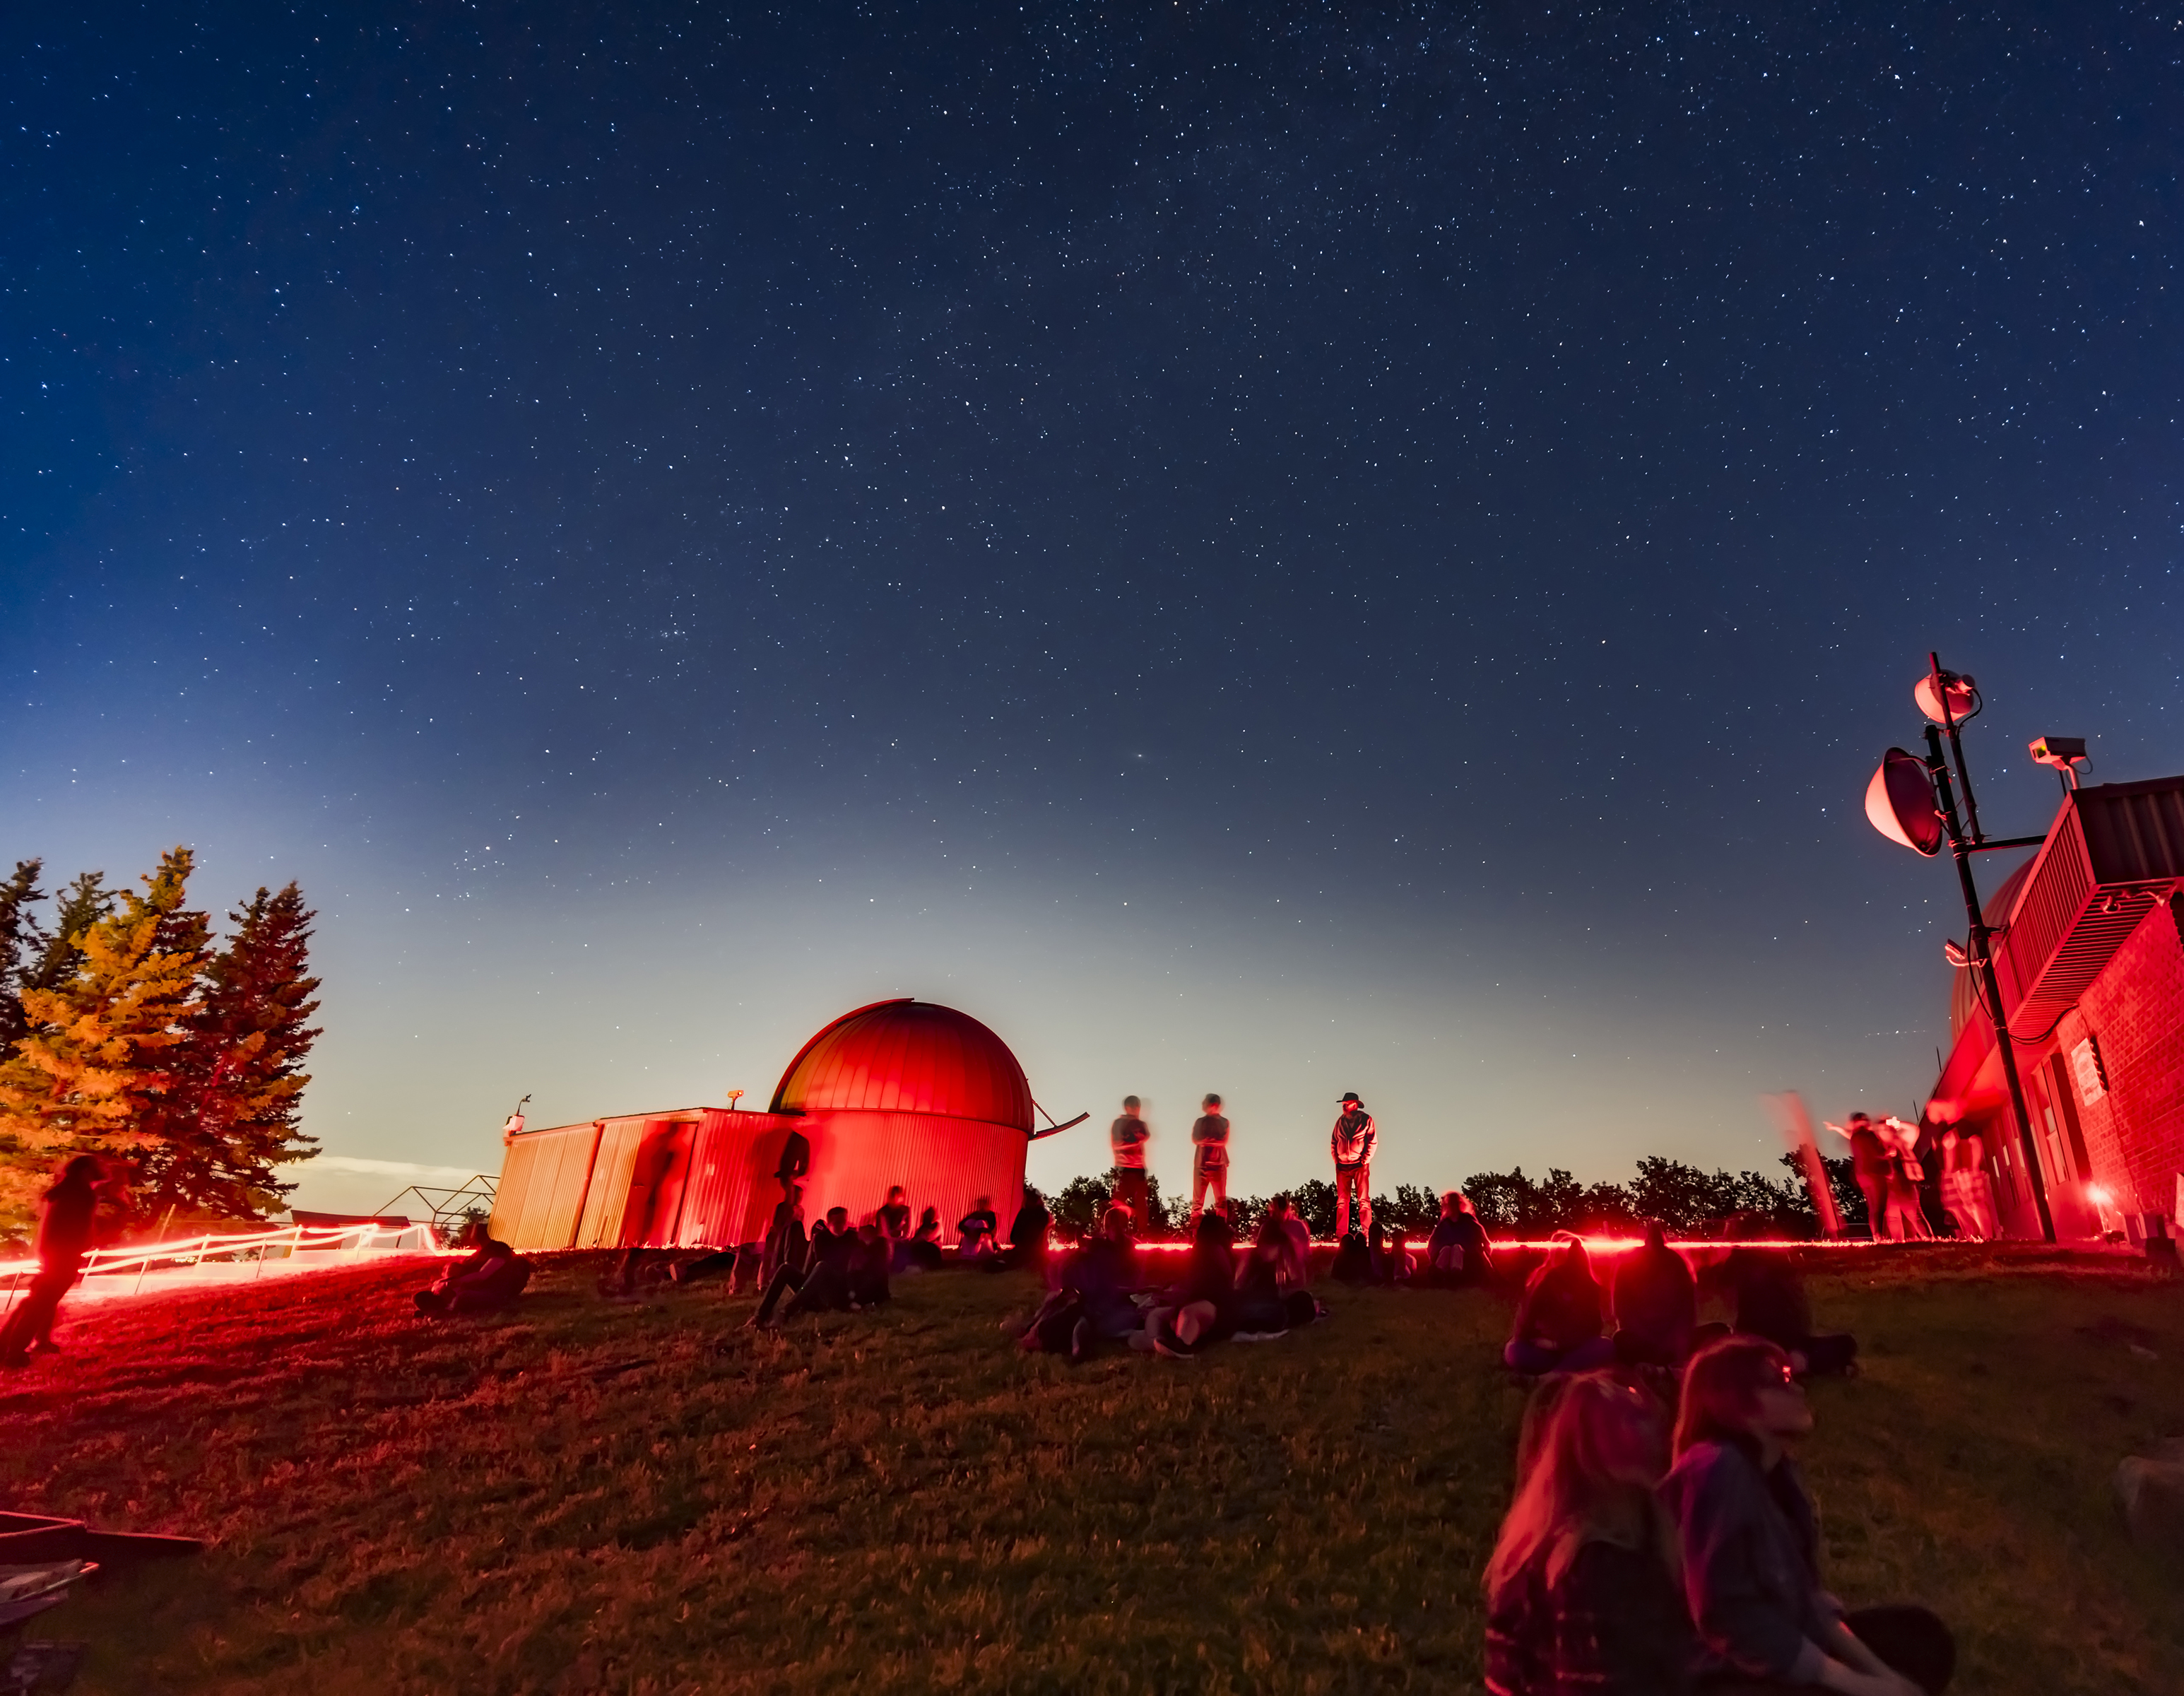 yglow from the city of Calgary, Alberta, some 12 miles (20 km) away drowns out the sky to the northeast of Rothney Astrophysical Observatory in Priddis, Alberta. 